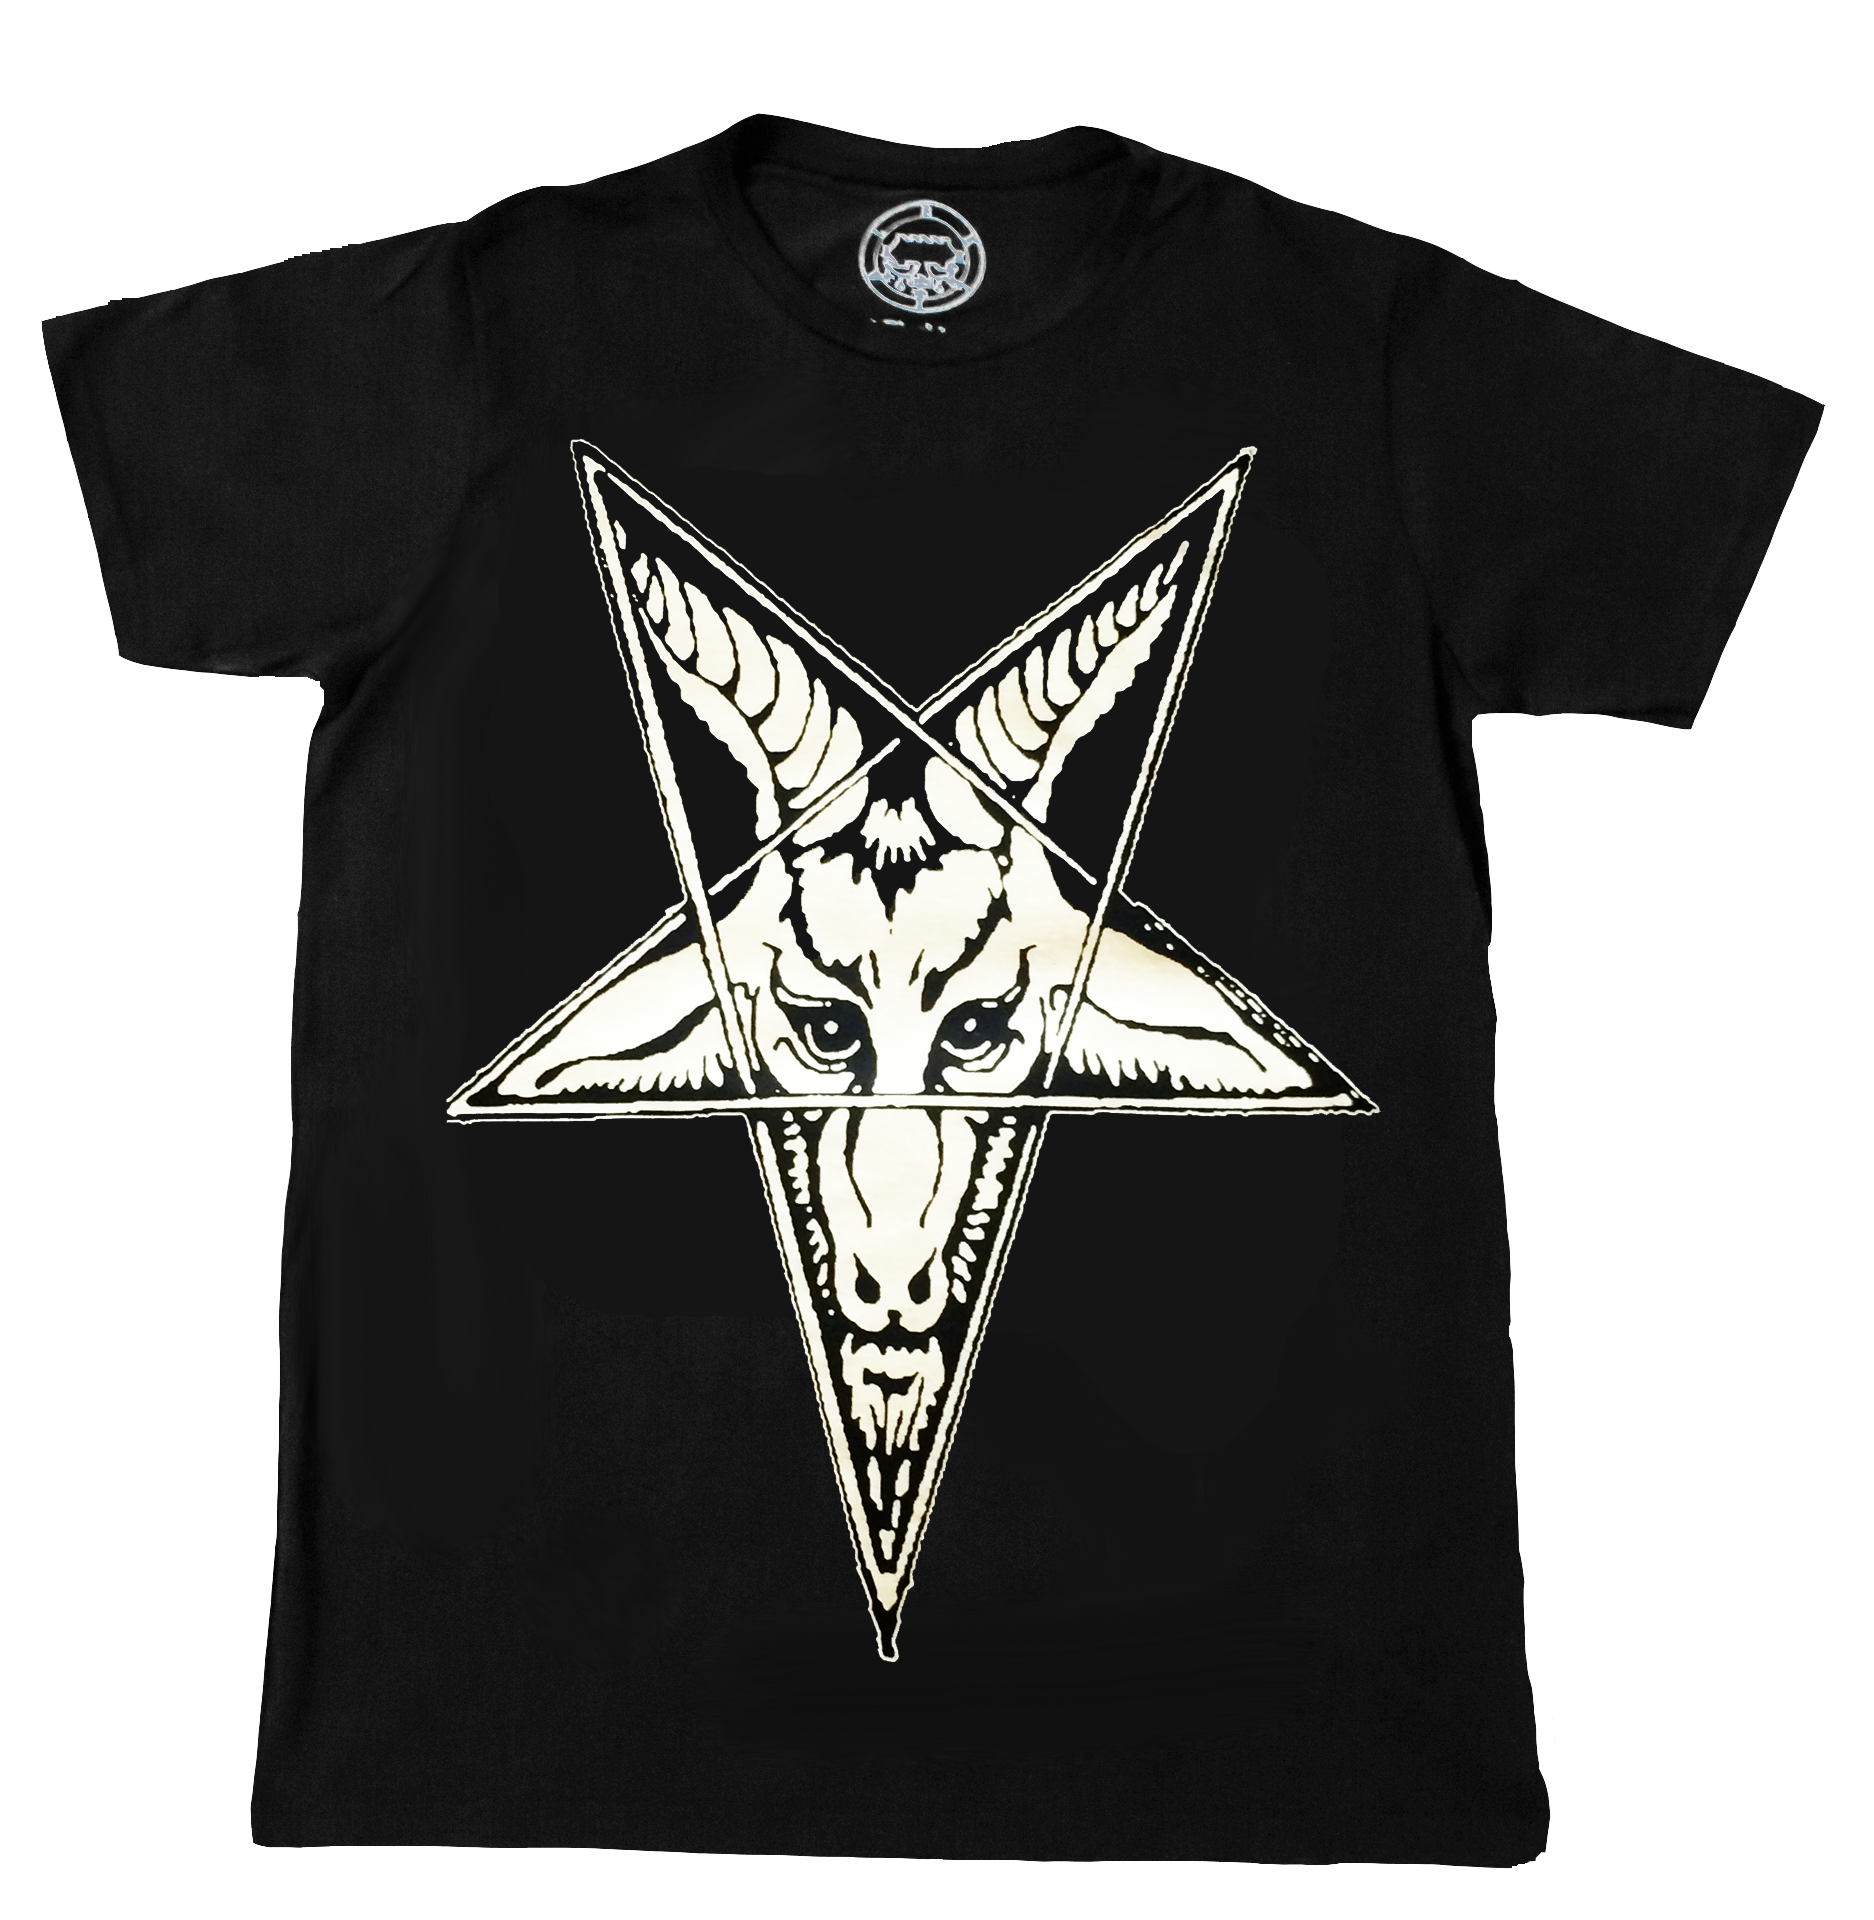 Mendes Goat T-shirt Occult Satanic Belial Clothing 